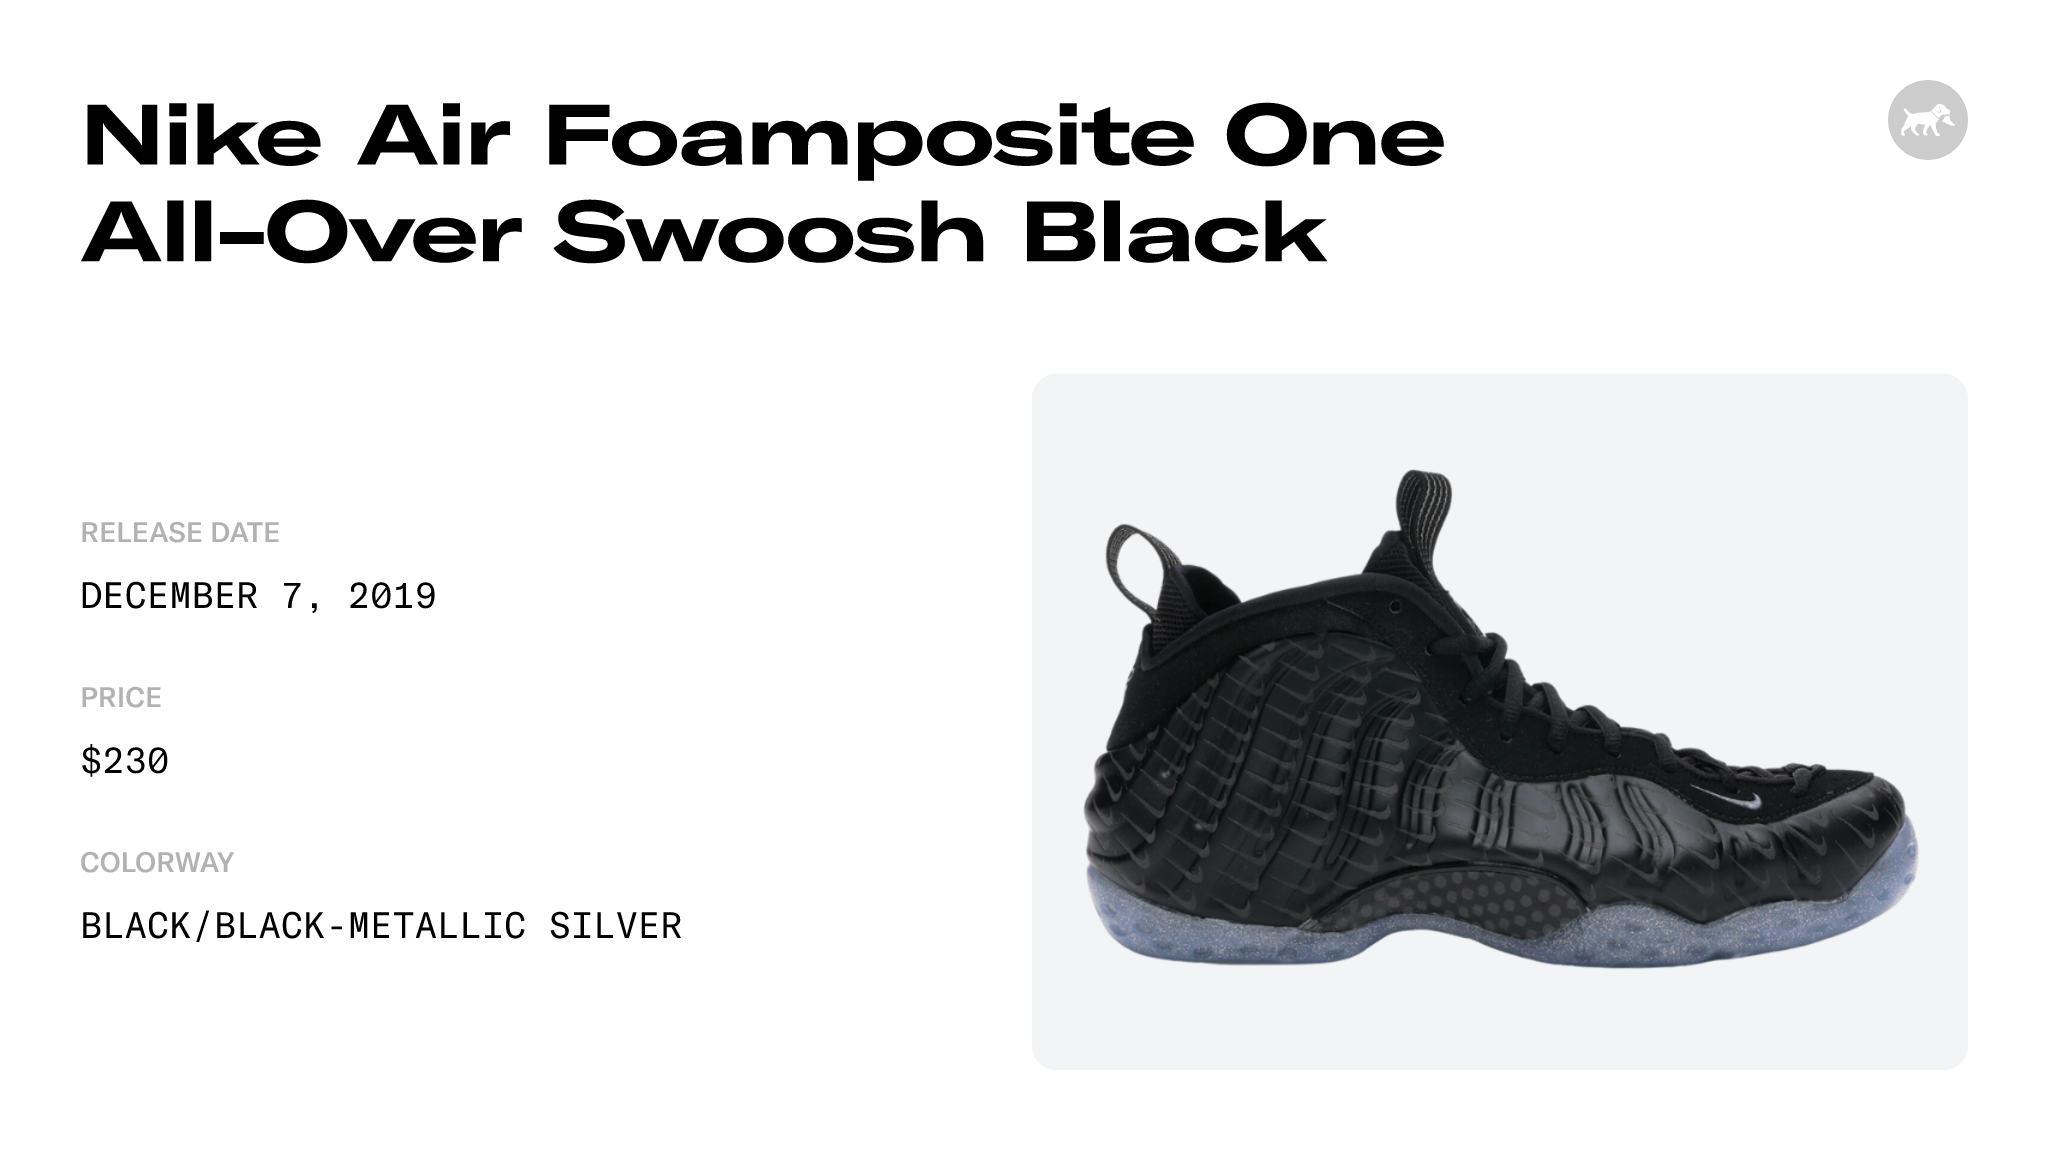 Nike Air Foamposite One All-Over Swoosh Black Raffles and Release Date ...